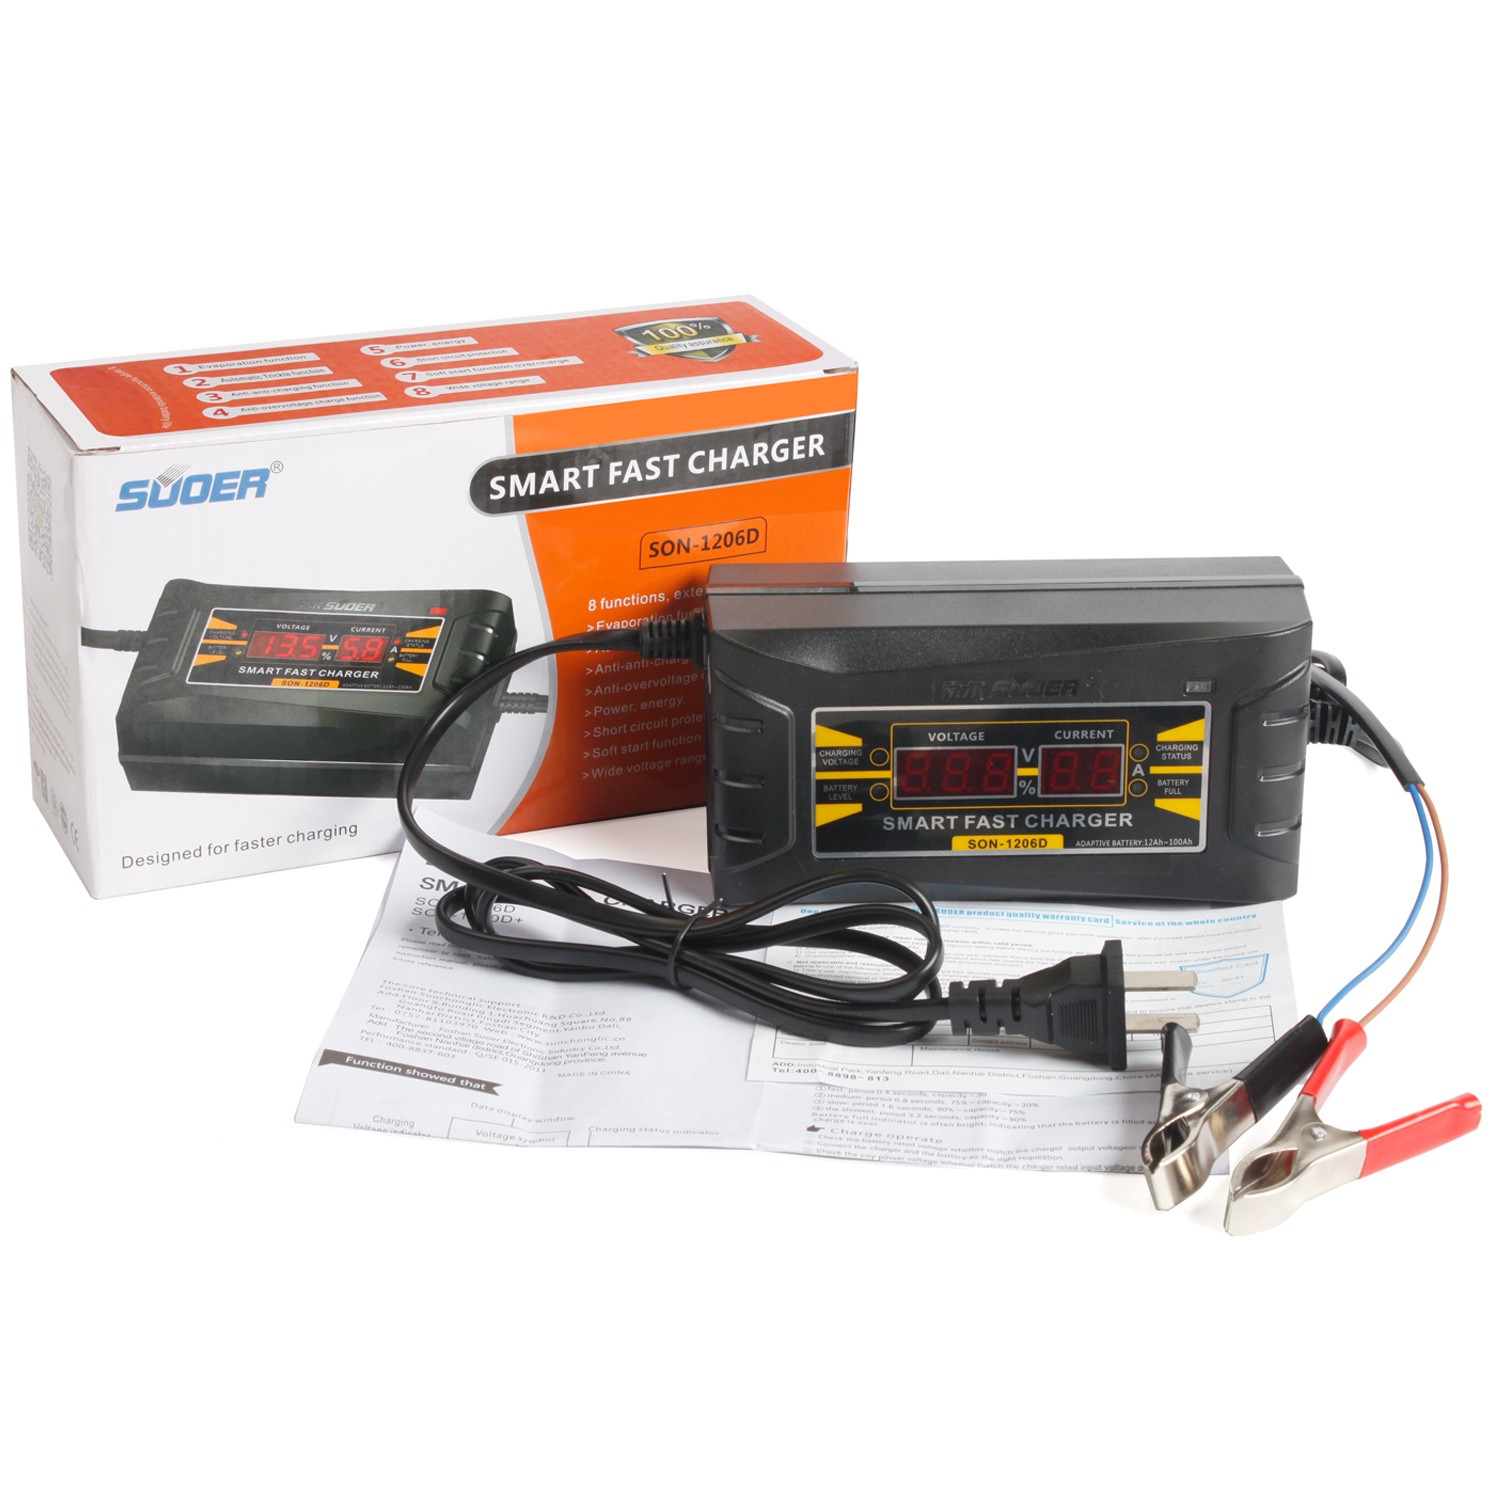 Details about 12V Smart Fast Lead acid Battery Charger for Car Motorcycle LCD Display US Plug